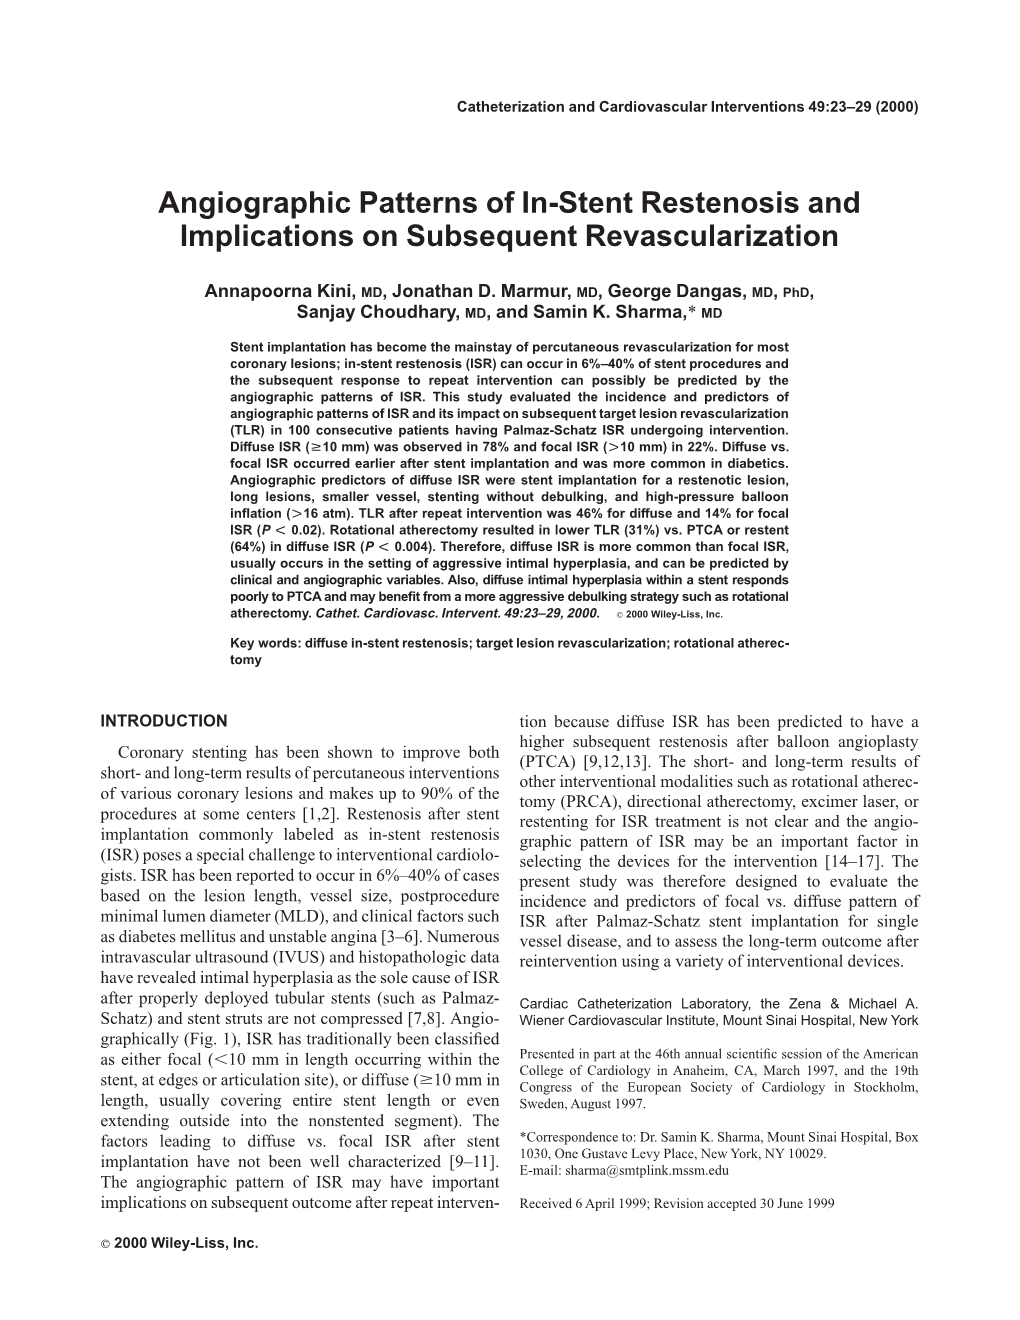 Angiographic Patterns of In-Stent Restenosis and Implications on Subsequent Revascularization